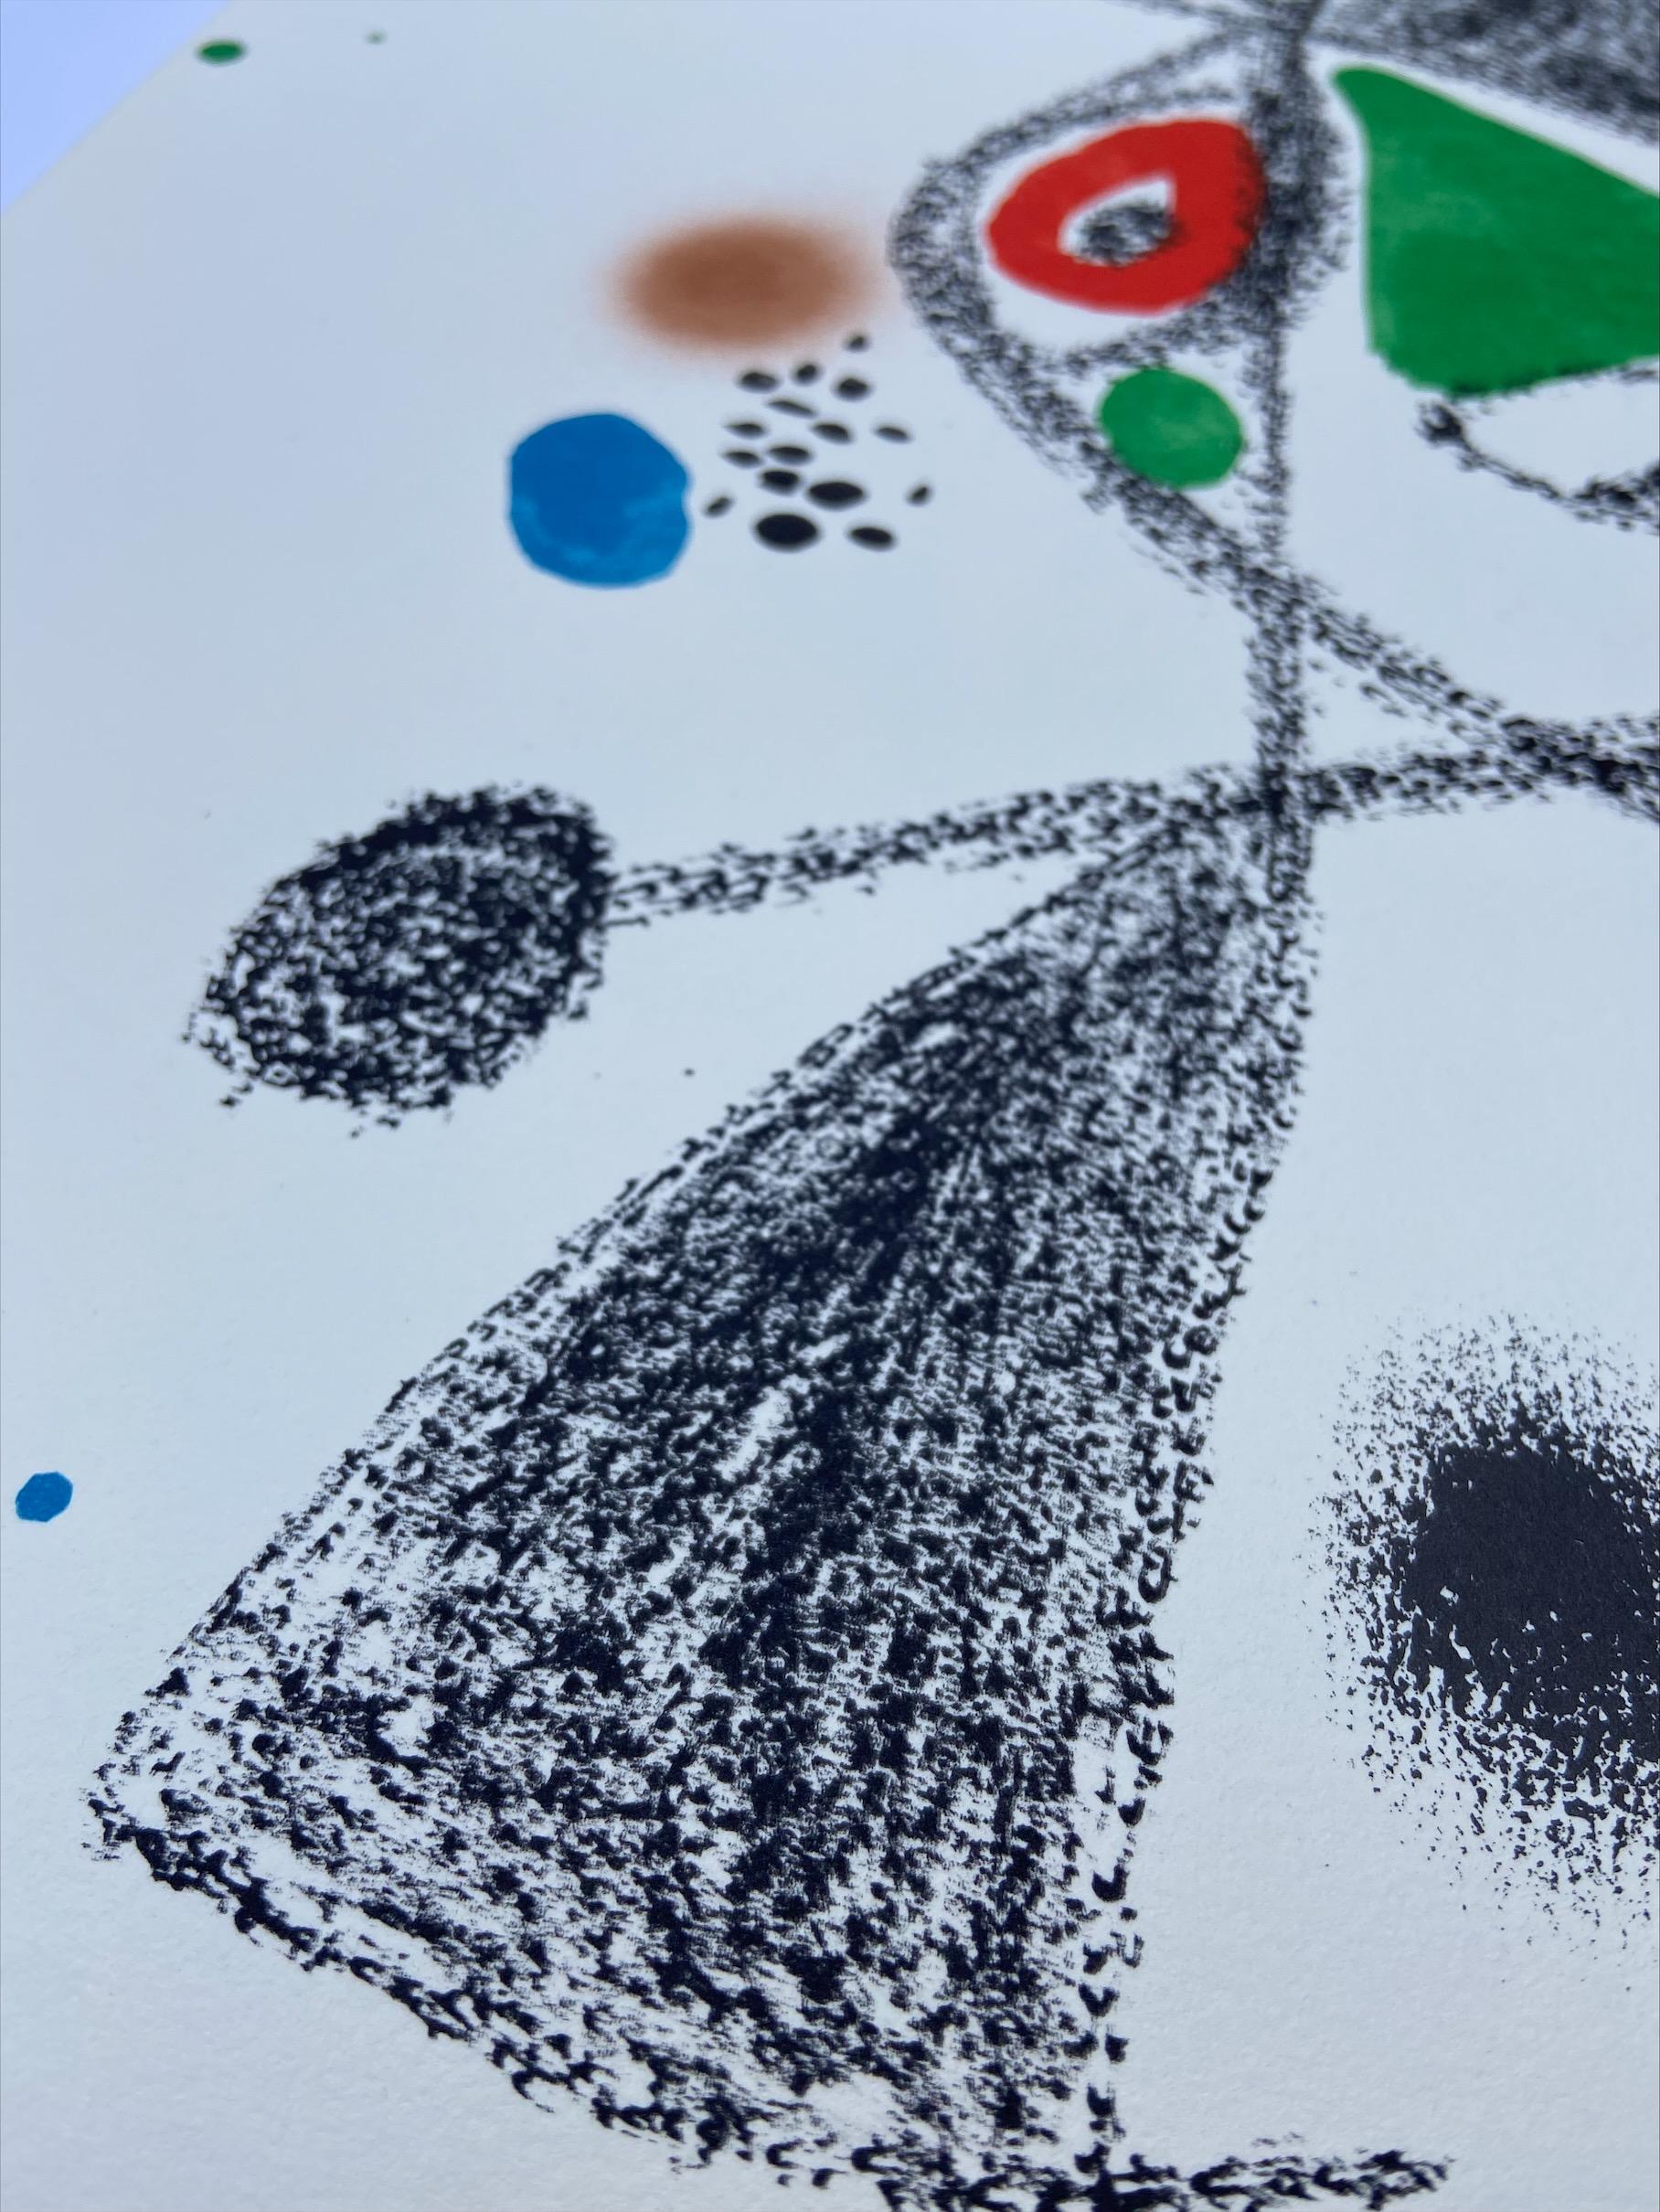 Joan Miró - Maravillas con variaciones n-4
Lithography 
35,7x49,6cm
Signed in the plate 
1975
Edition of 1500 copies on Guarro paper
Publisher : Poligrafa Barcelona 
890€